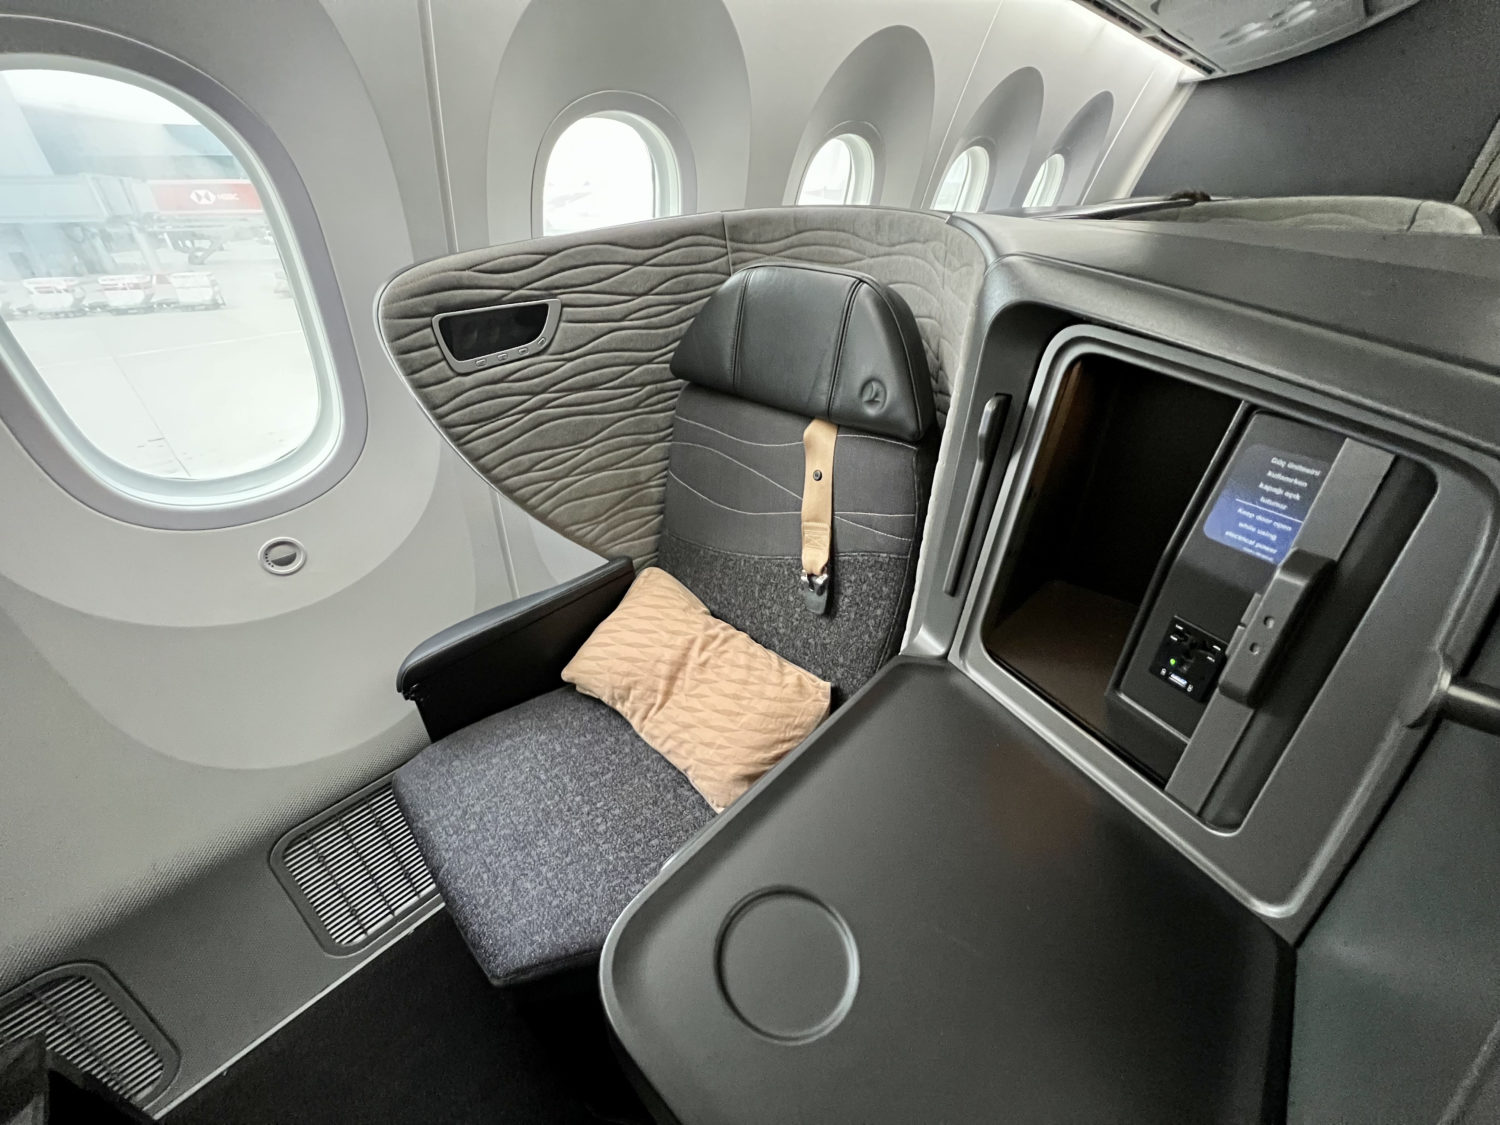 turkish airlines business class seat